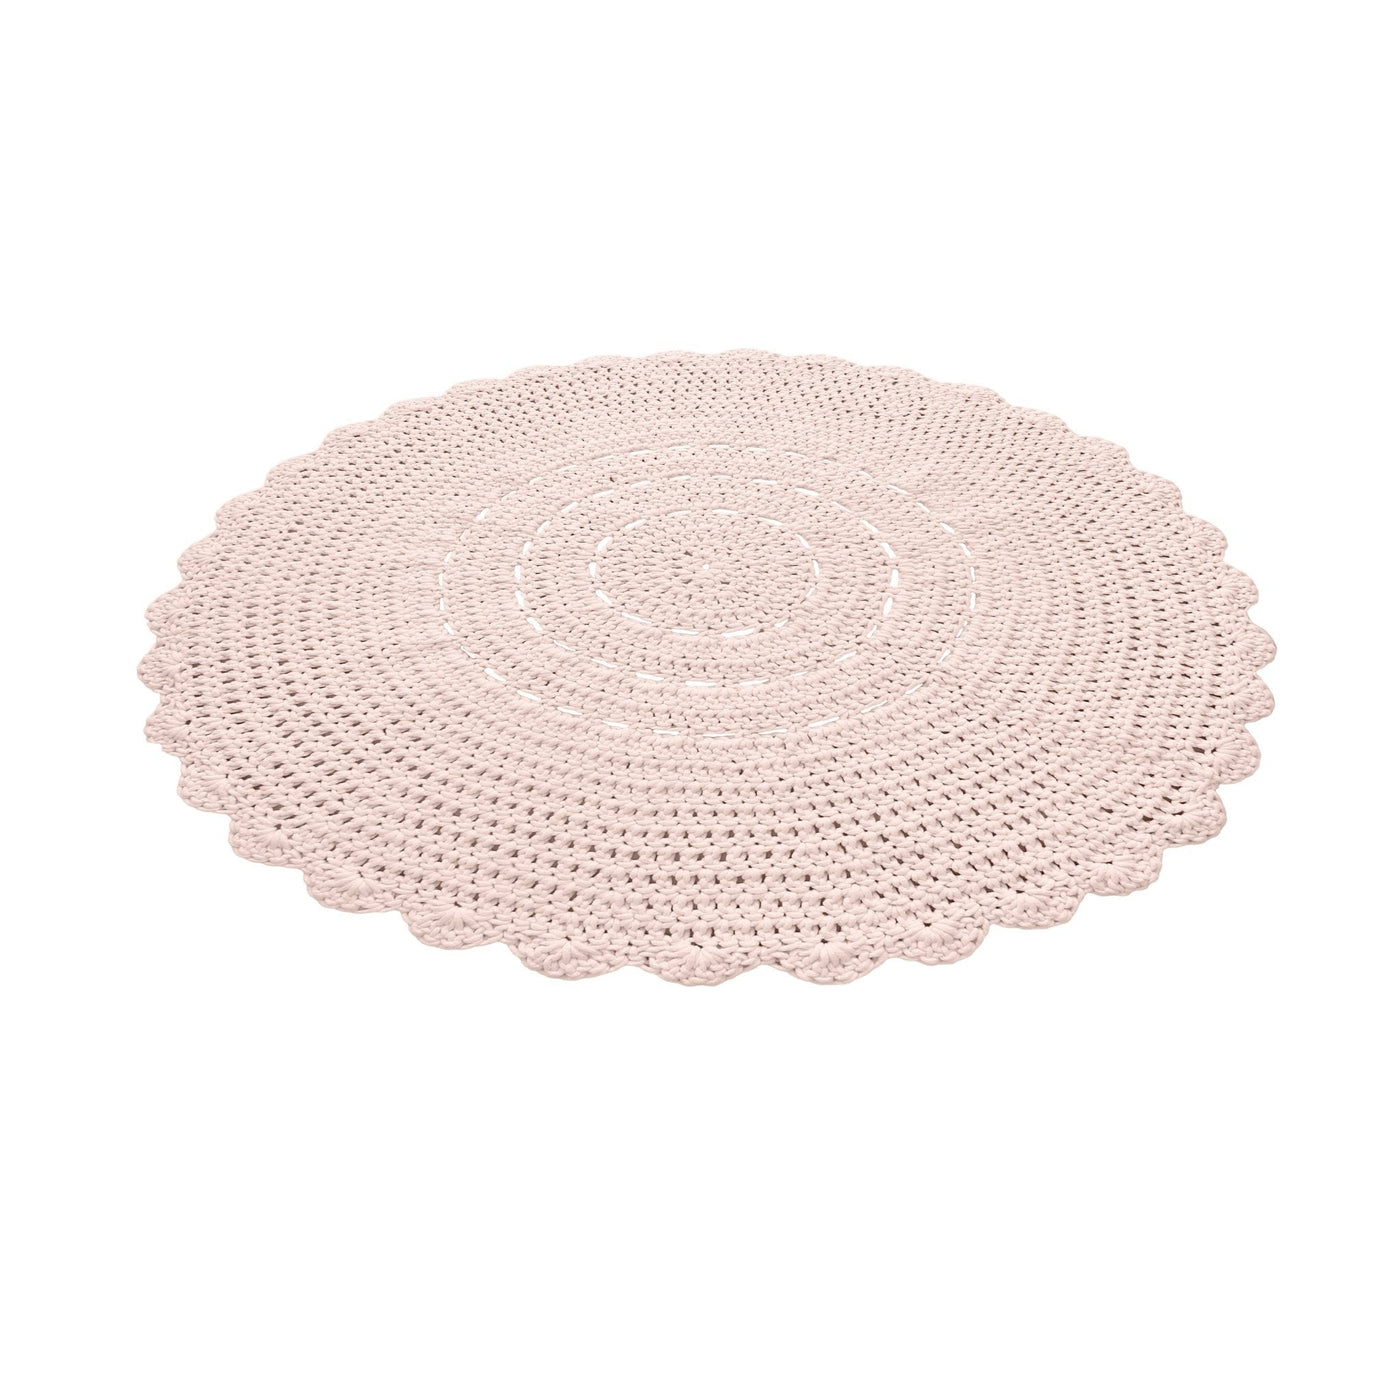 Crochet Doily Rug | Pale Pink